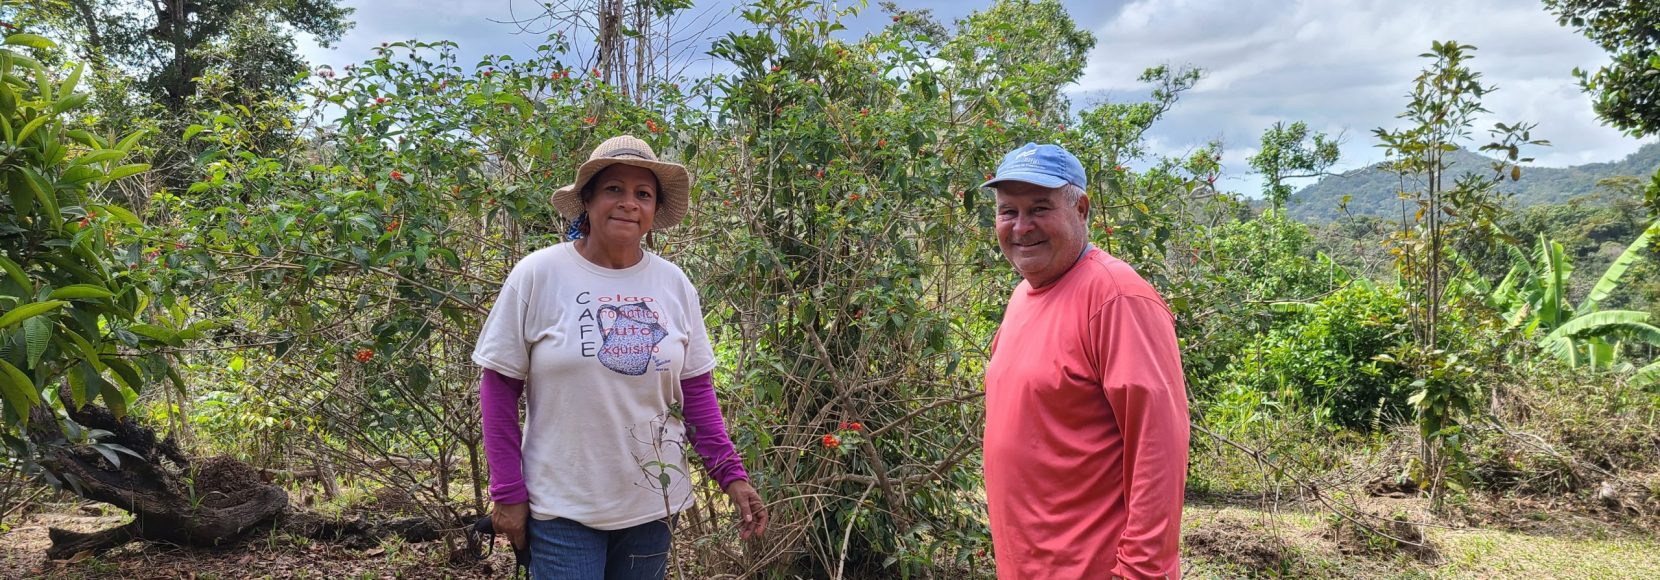 Elisa and Javier are Puerto Rican coffee farmers who participated in a TechnoServe program.